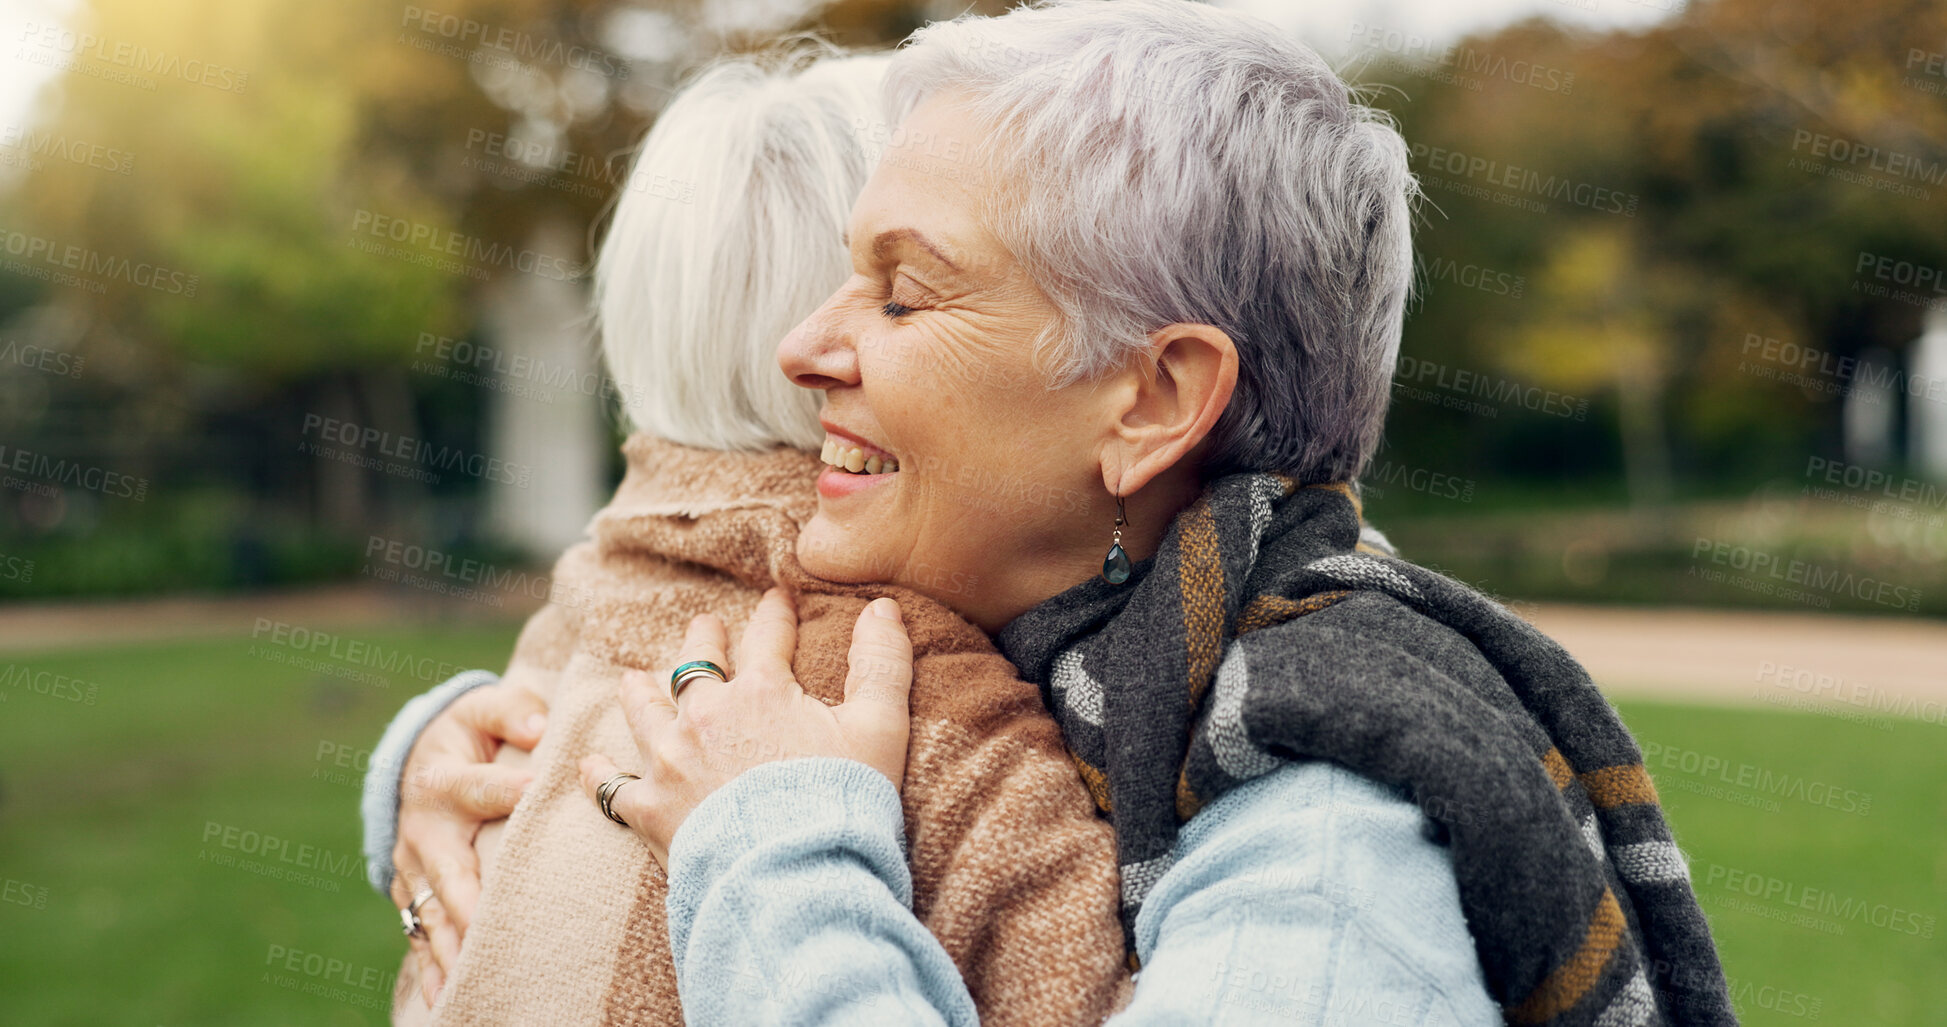 Buy stock photo Love, connection and elderly women hugging for affection, romance and bonding on an outdoor date. Nature, commitment and senior female couple in retirement with intimate moment in a garden or park.